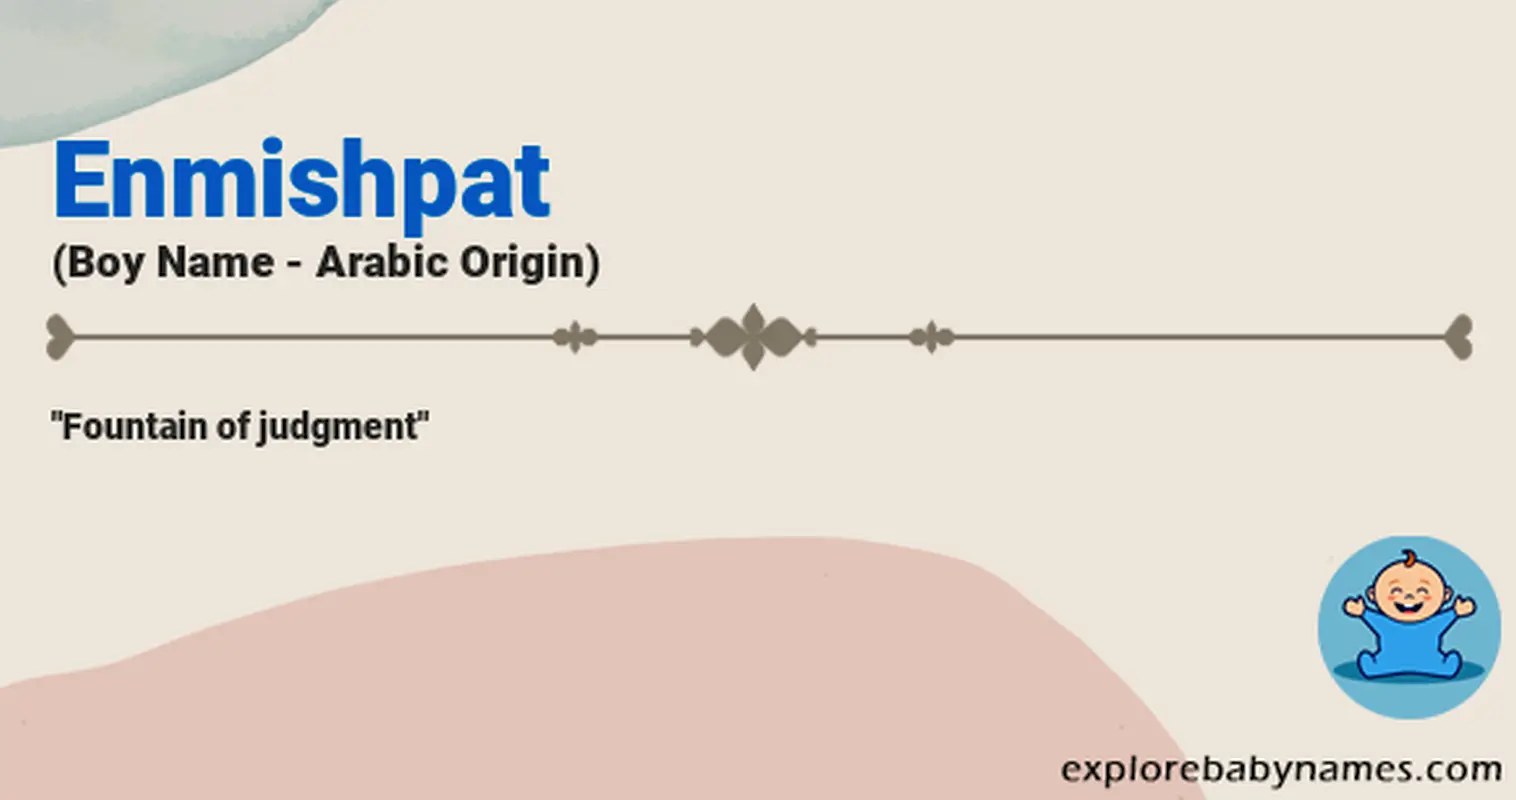 Meaning of Enmishpat